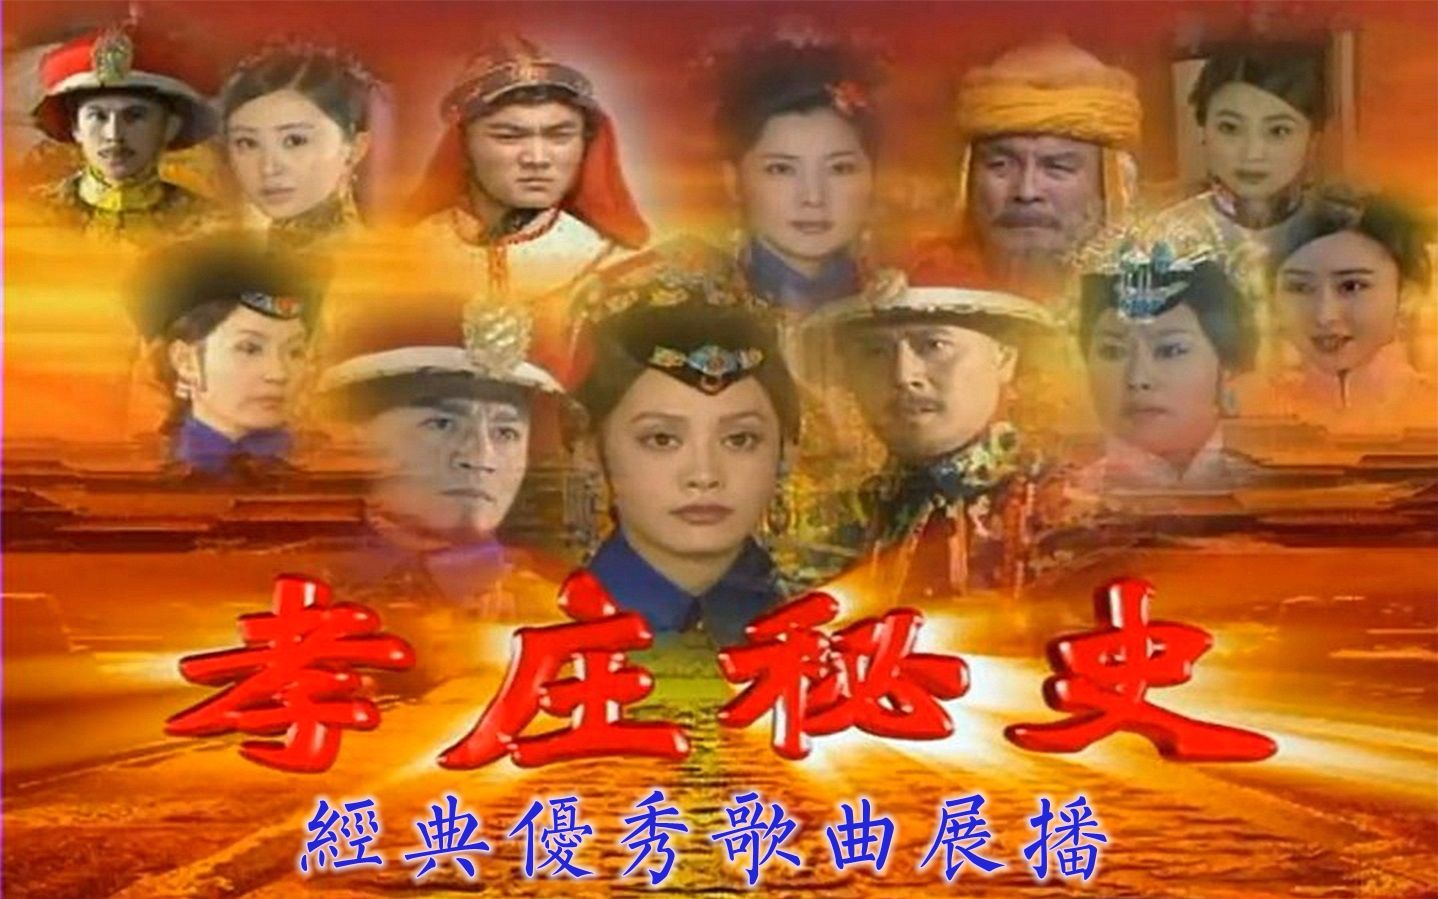 happy ever after tvb